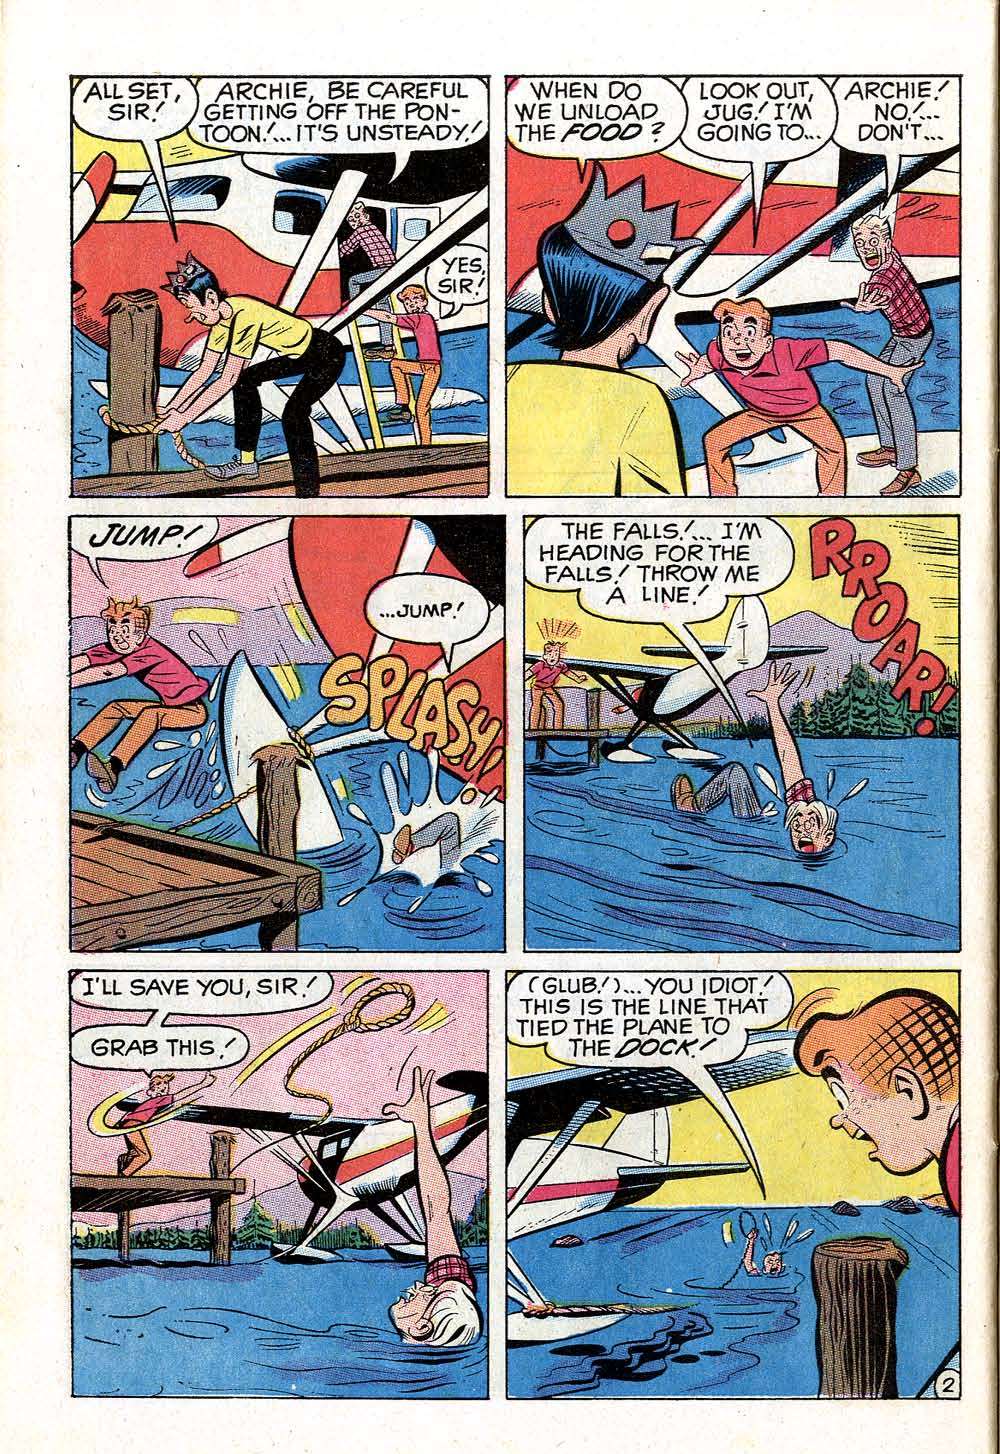 Archie (1960) 203 Page 30